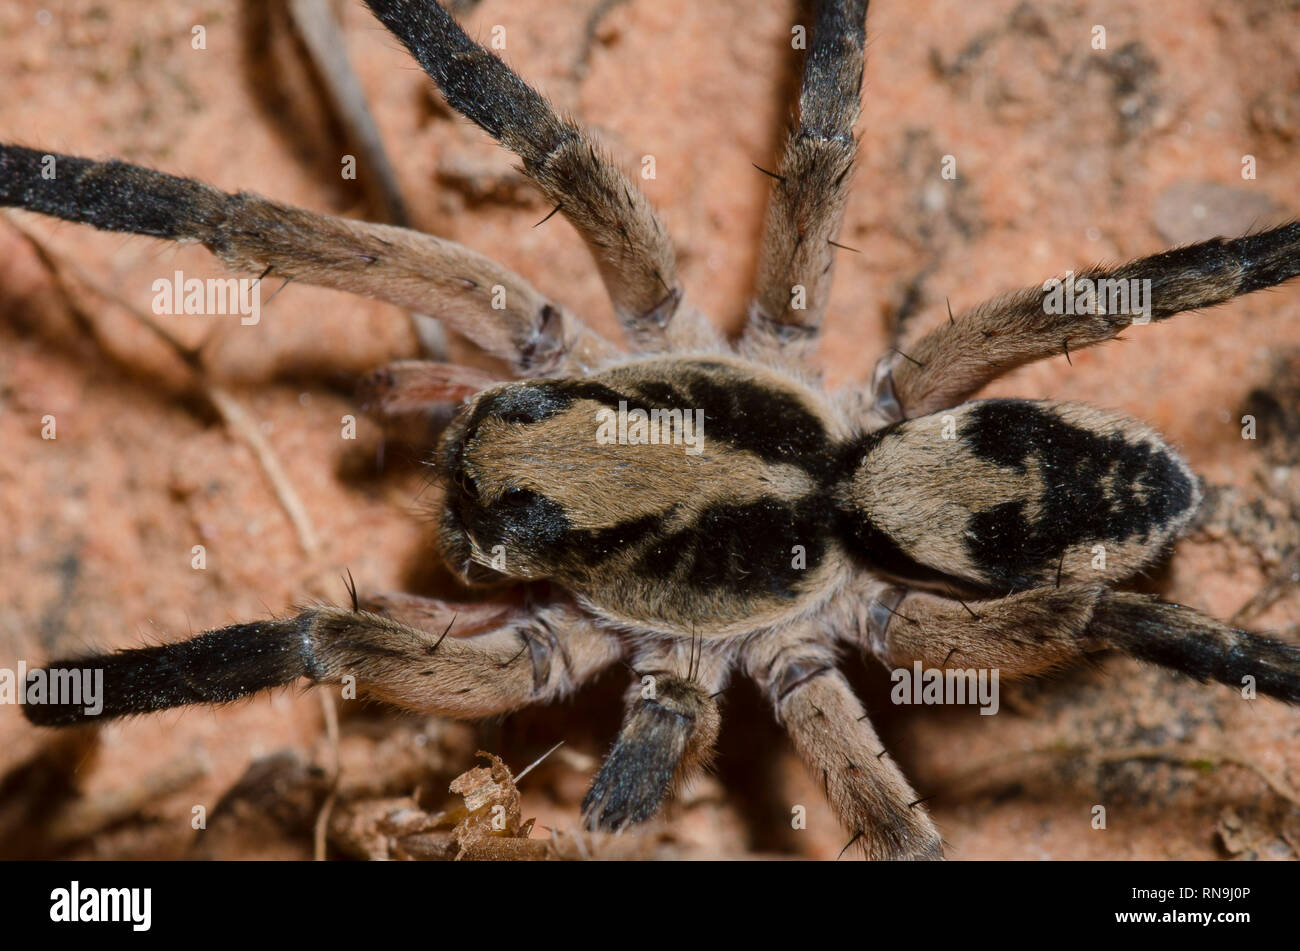 Burrowing Wolf Spider, Geolycosa sp. Stock Photo